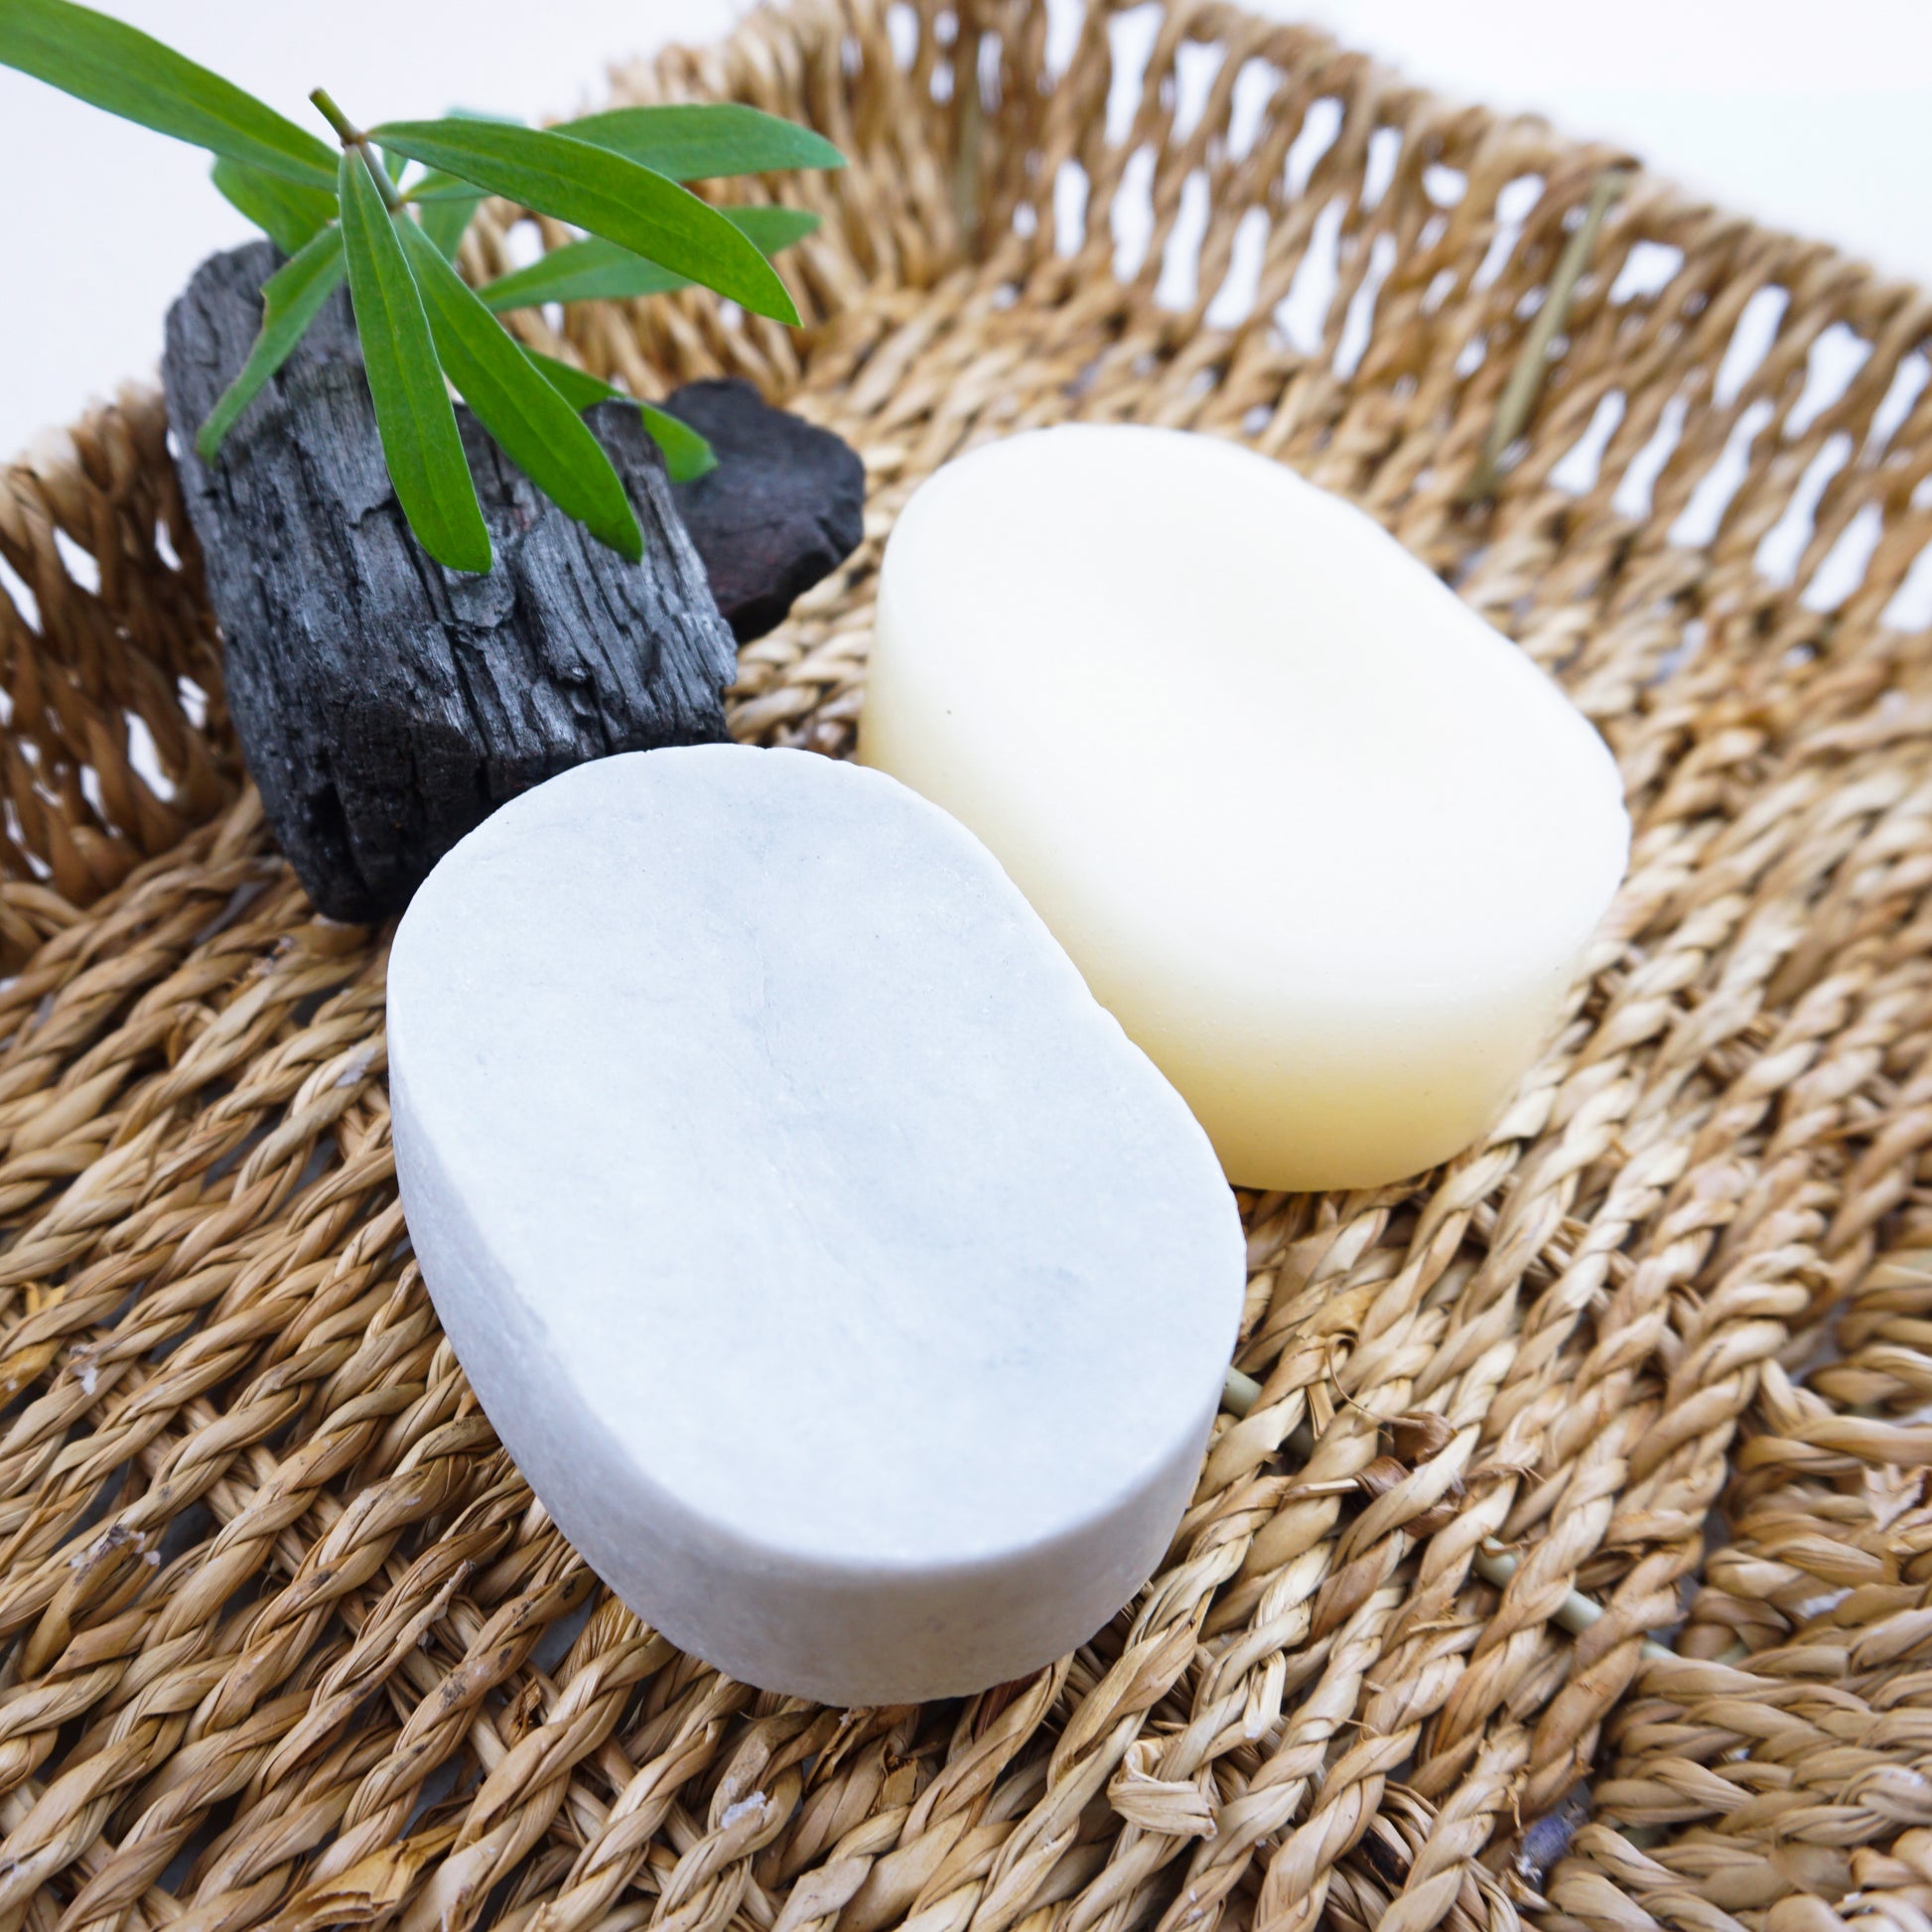 charcoal and tea tree shampoo and conditioner bars sitting on hamper basket